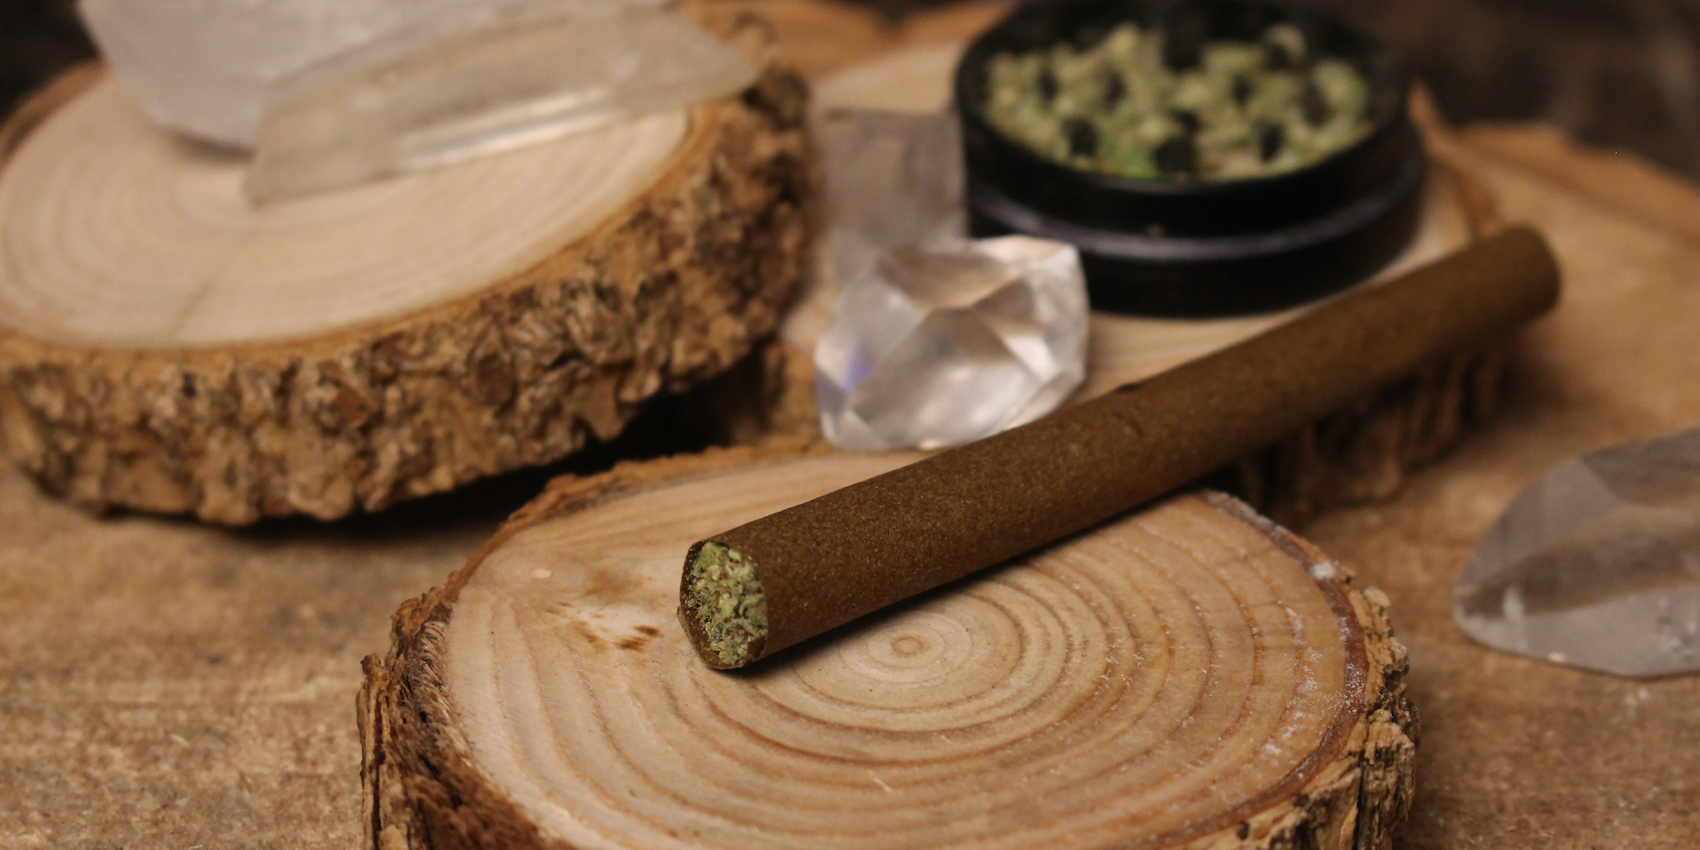 How to roll a blunt (7 steps with photos) - CBD Oracle